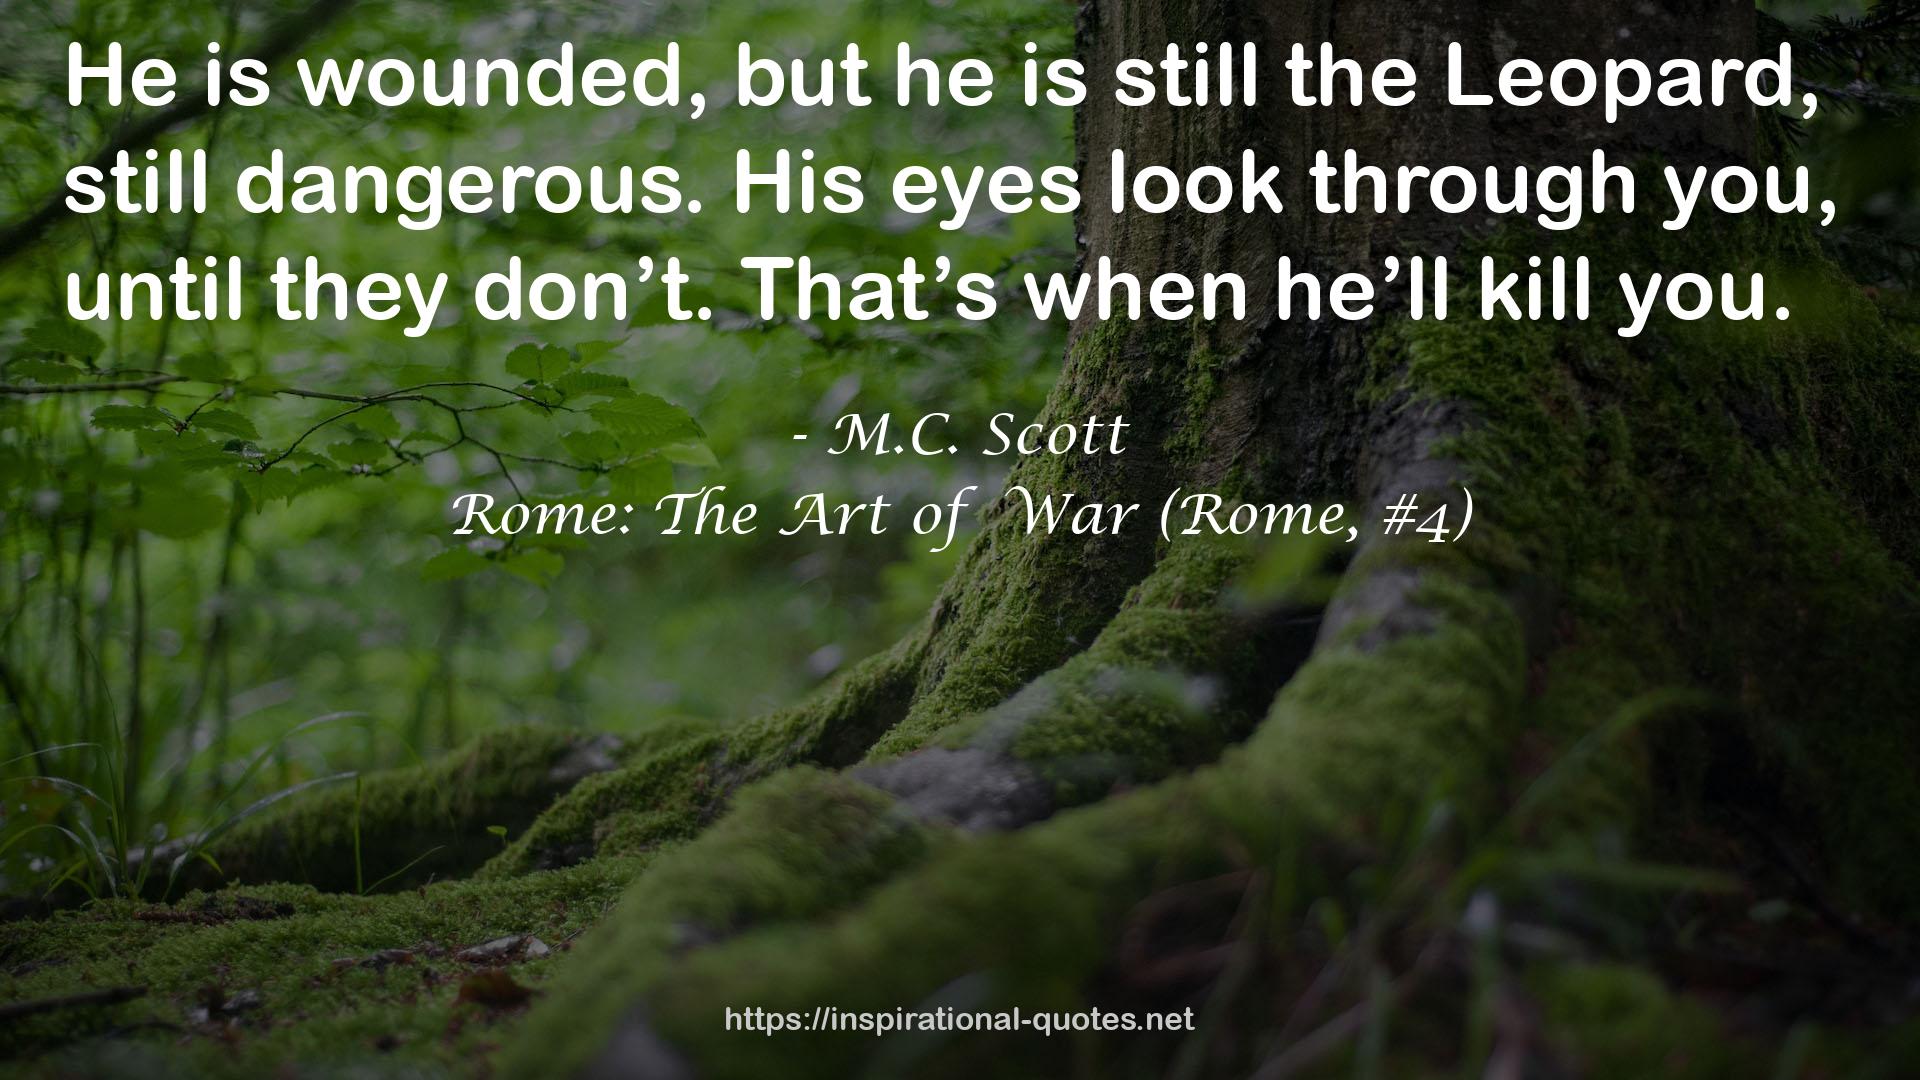 Rome: The Art of  War (Rome, #4) QUOTES